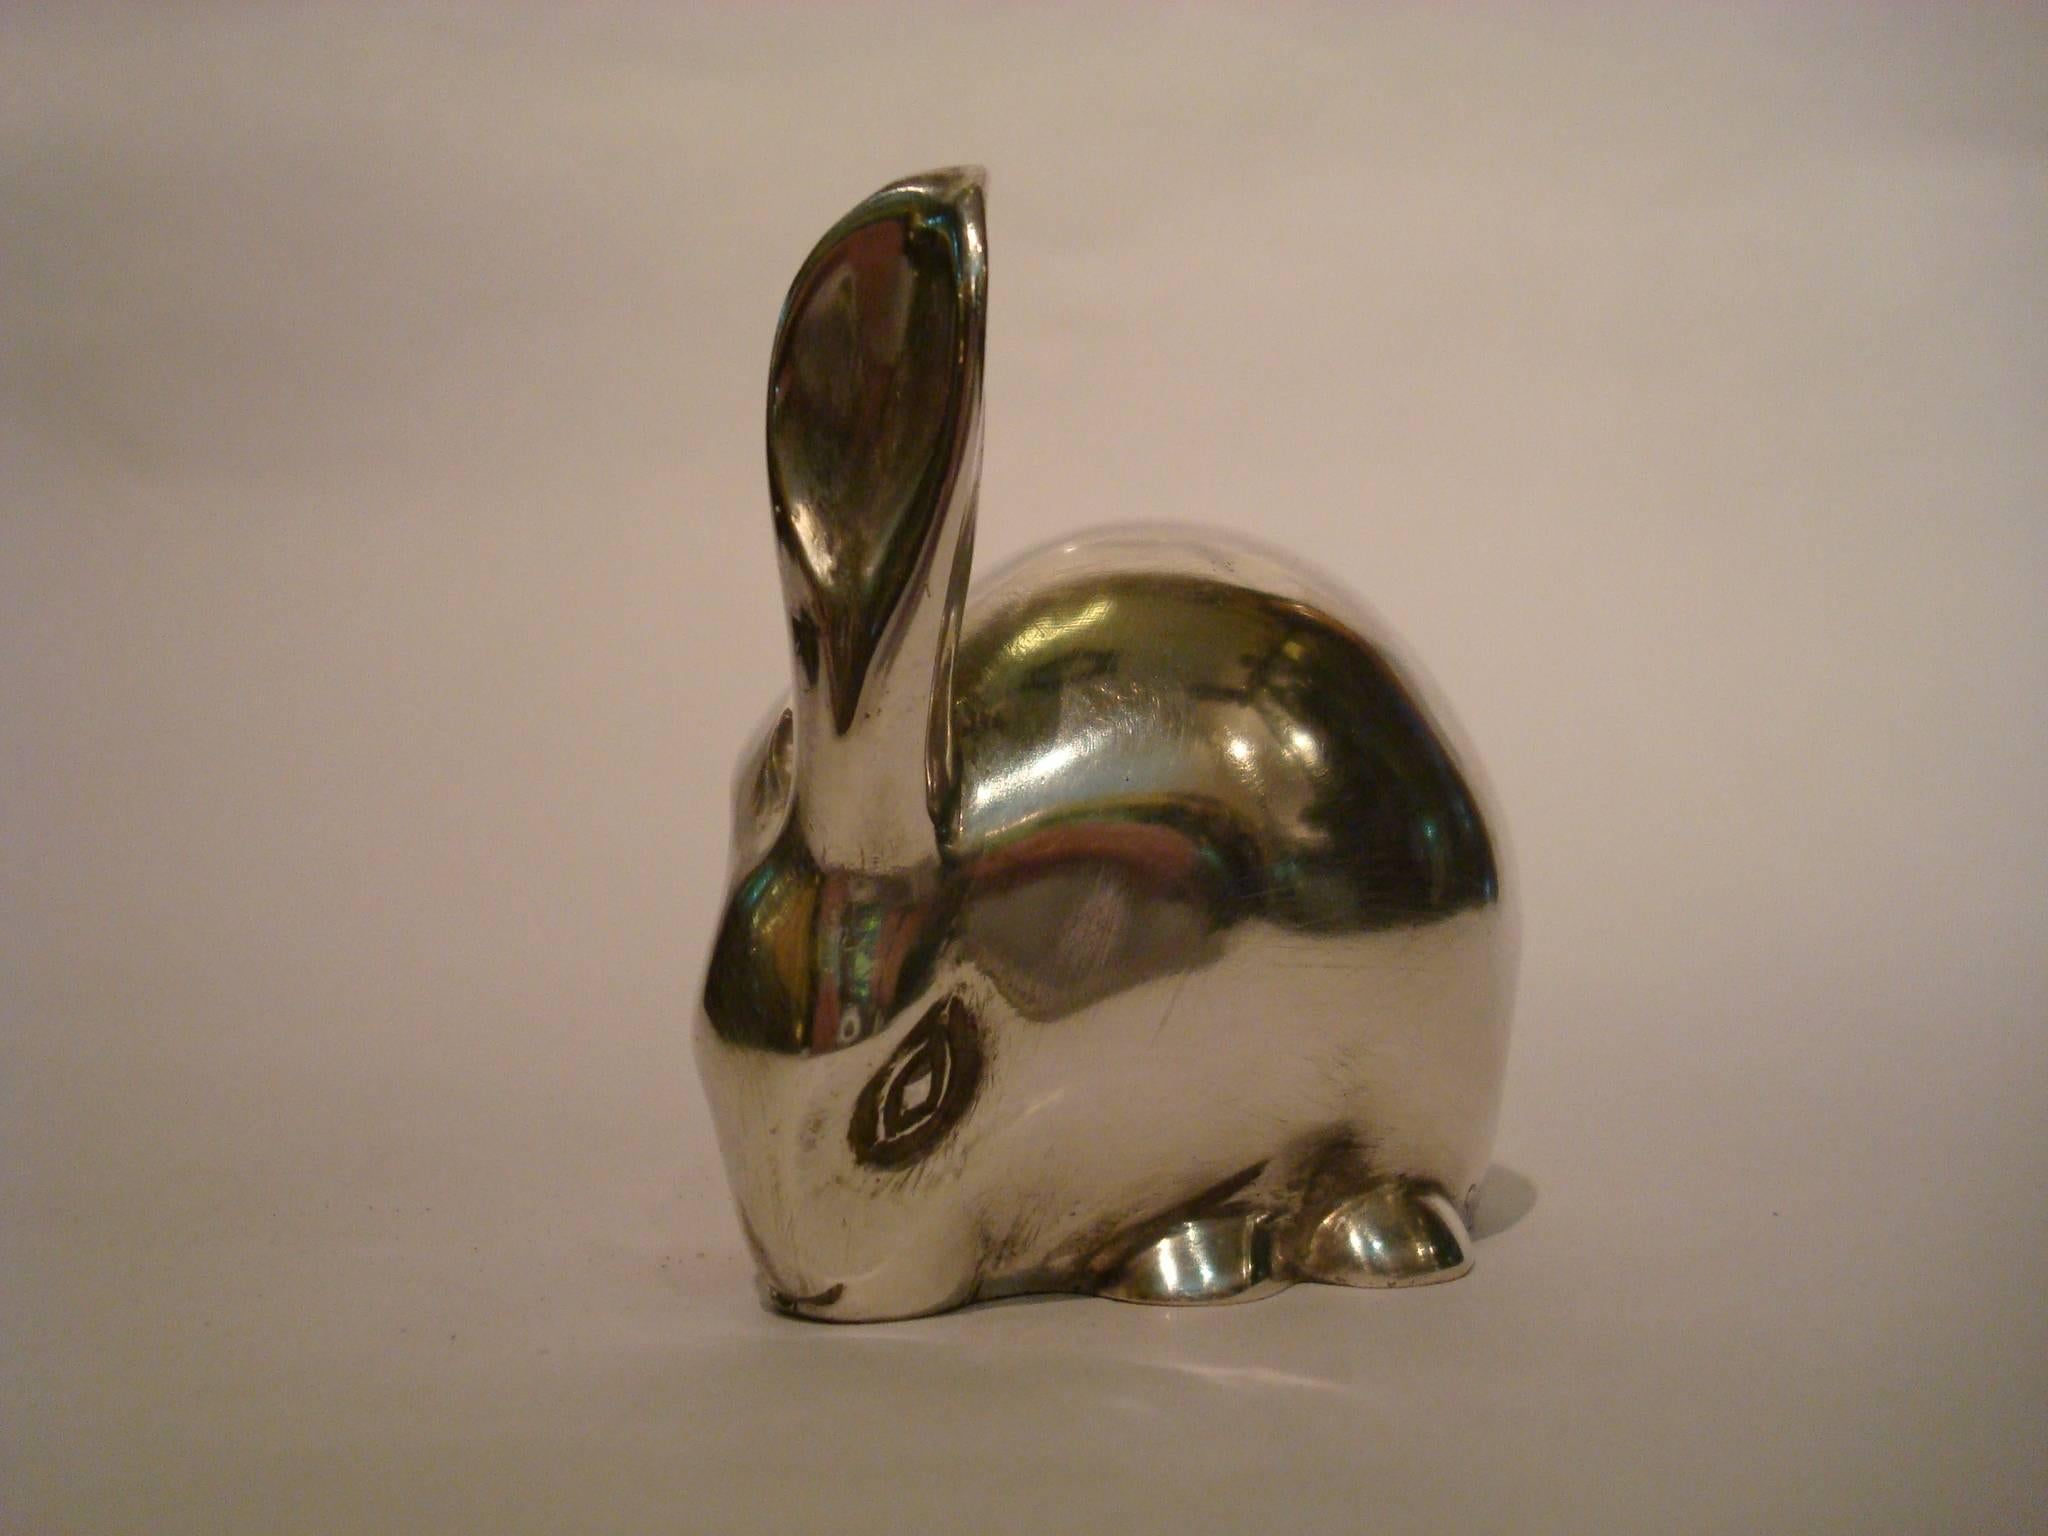 Art Deco silver plated bronze sculpture of a rabbit hare. Lovely paperweight. Edouard Marcel Sandoz (1881-1973). Signature/ Marks: Ed.M. Sandoz - Susse Fre'res Ed.